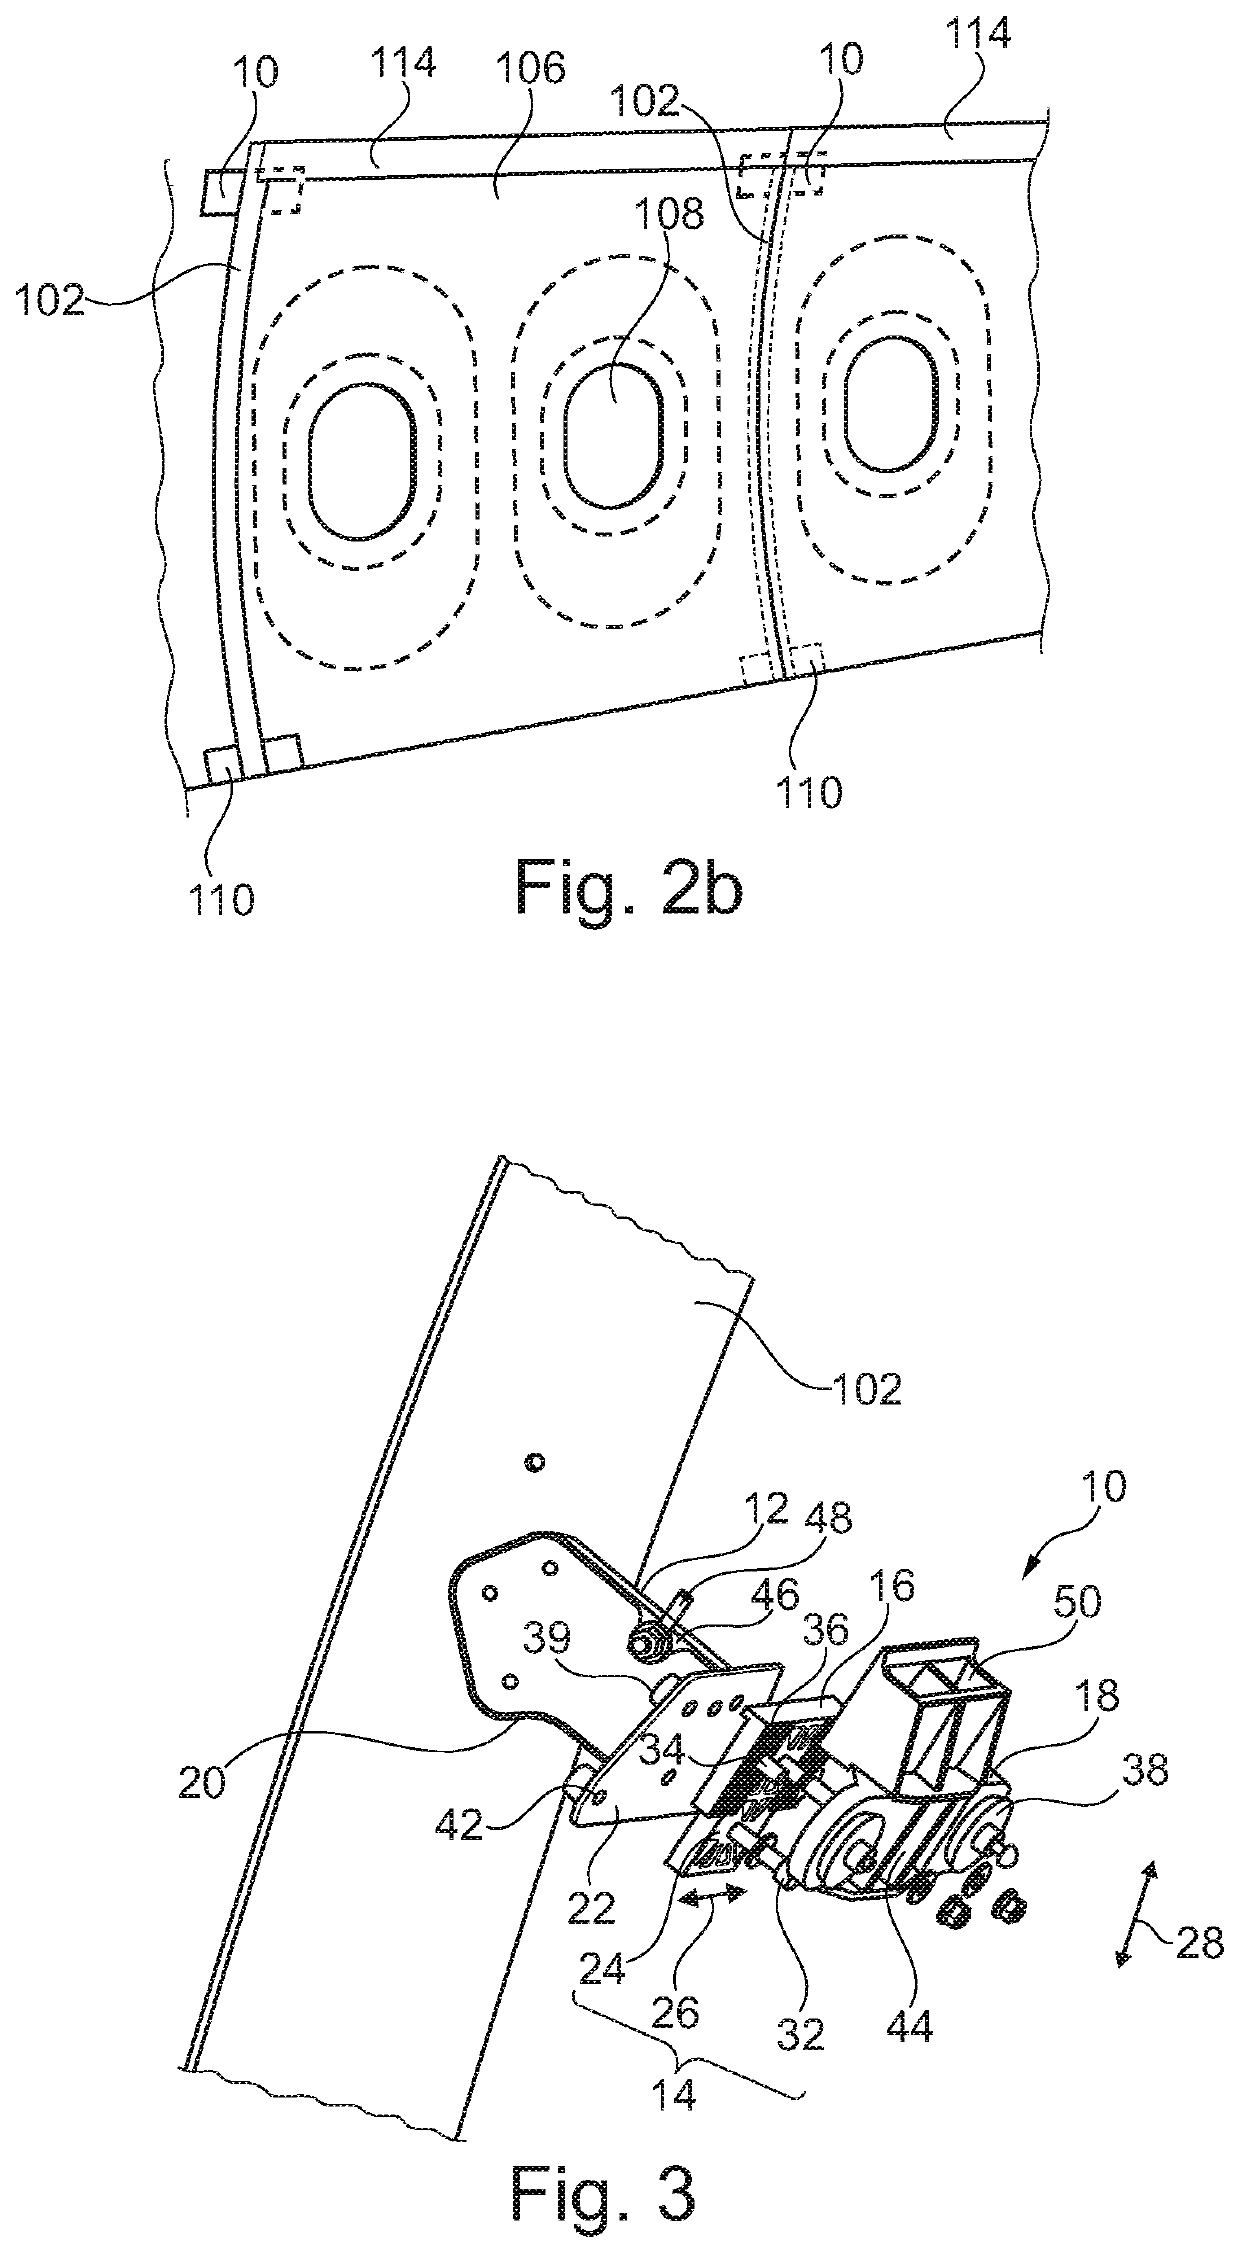 Device for fixing cabin side wall paneling and cabin light paneling to a structural component of an aircraft and spacecraft